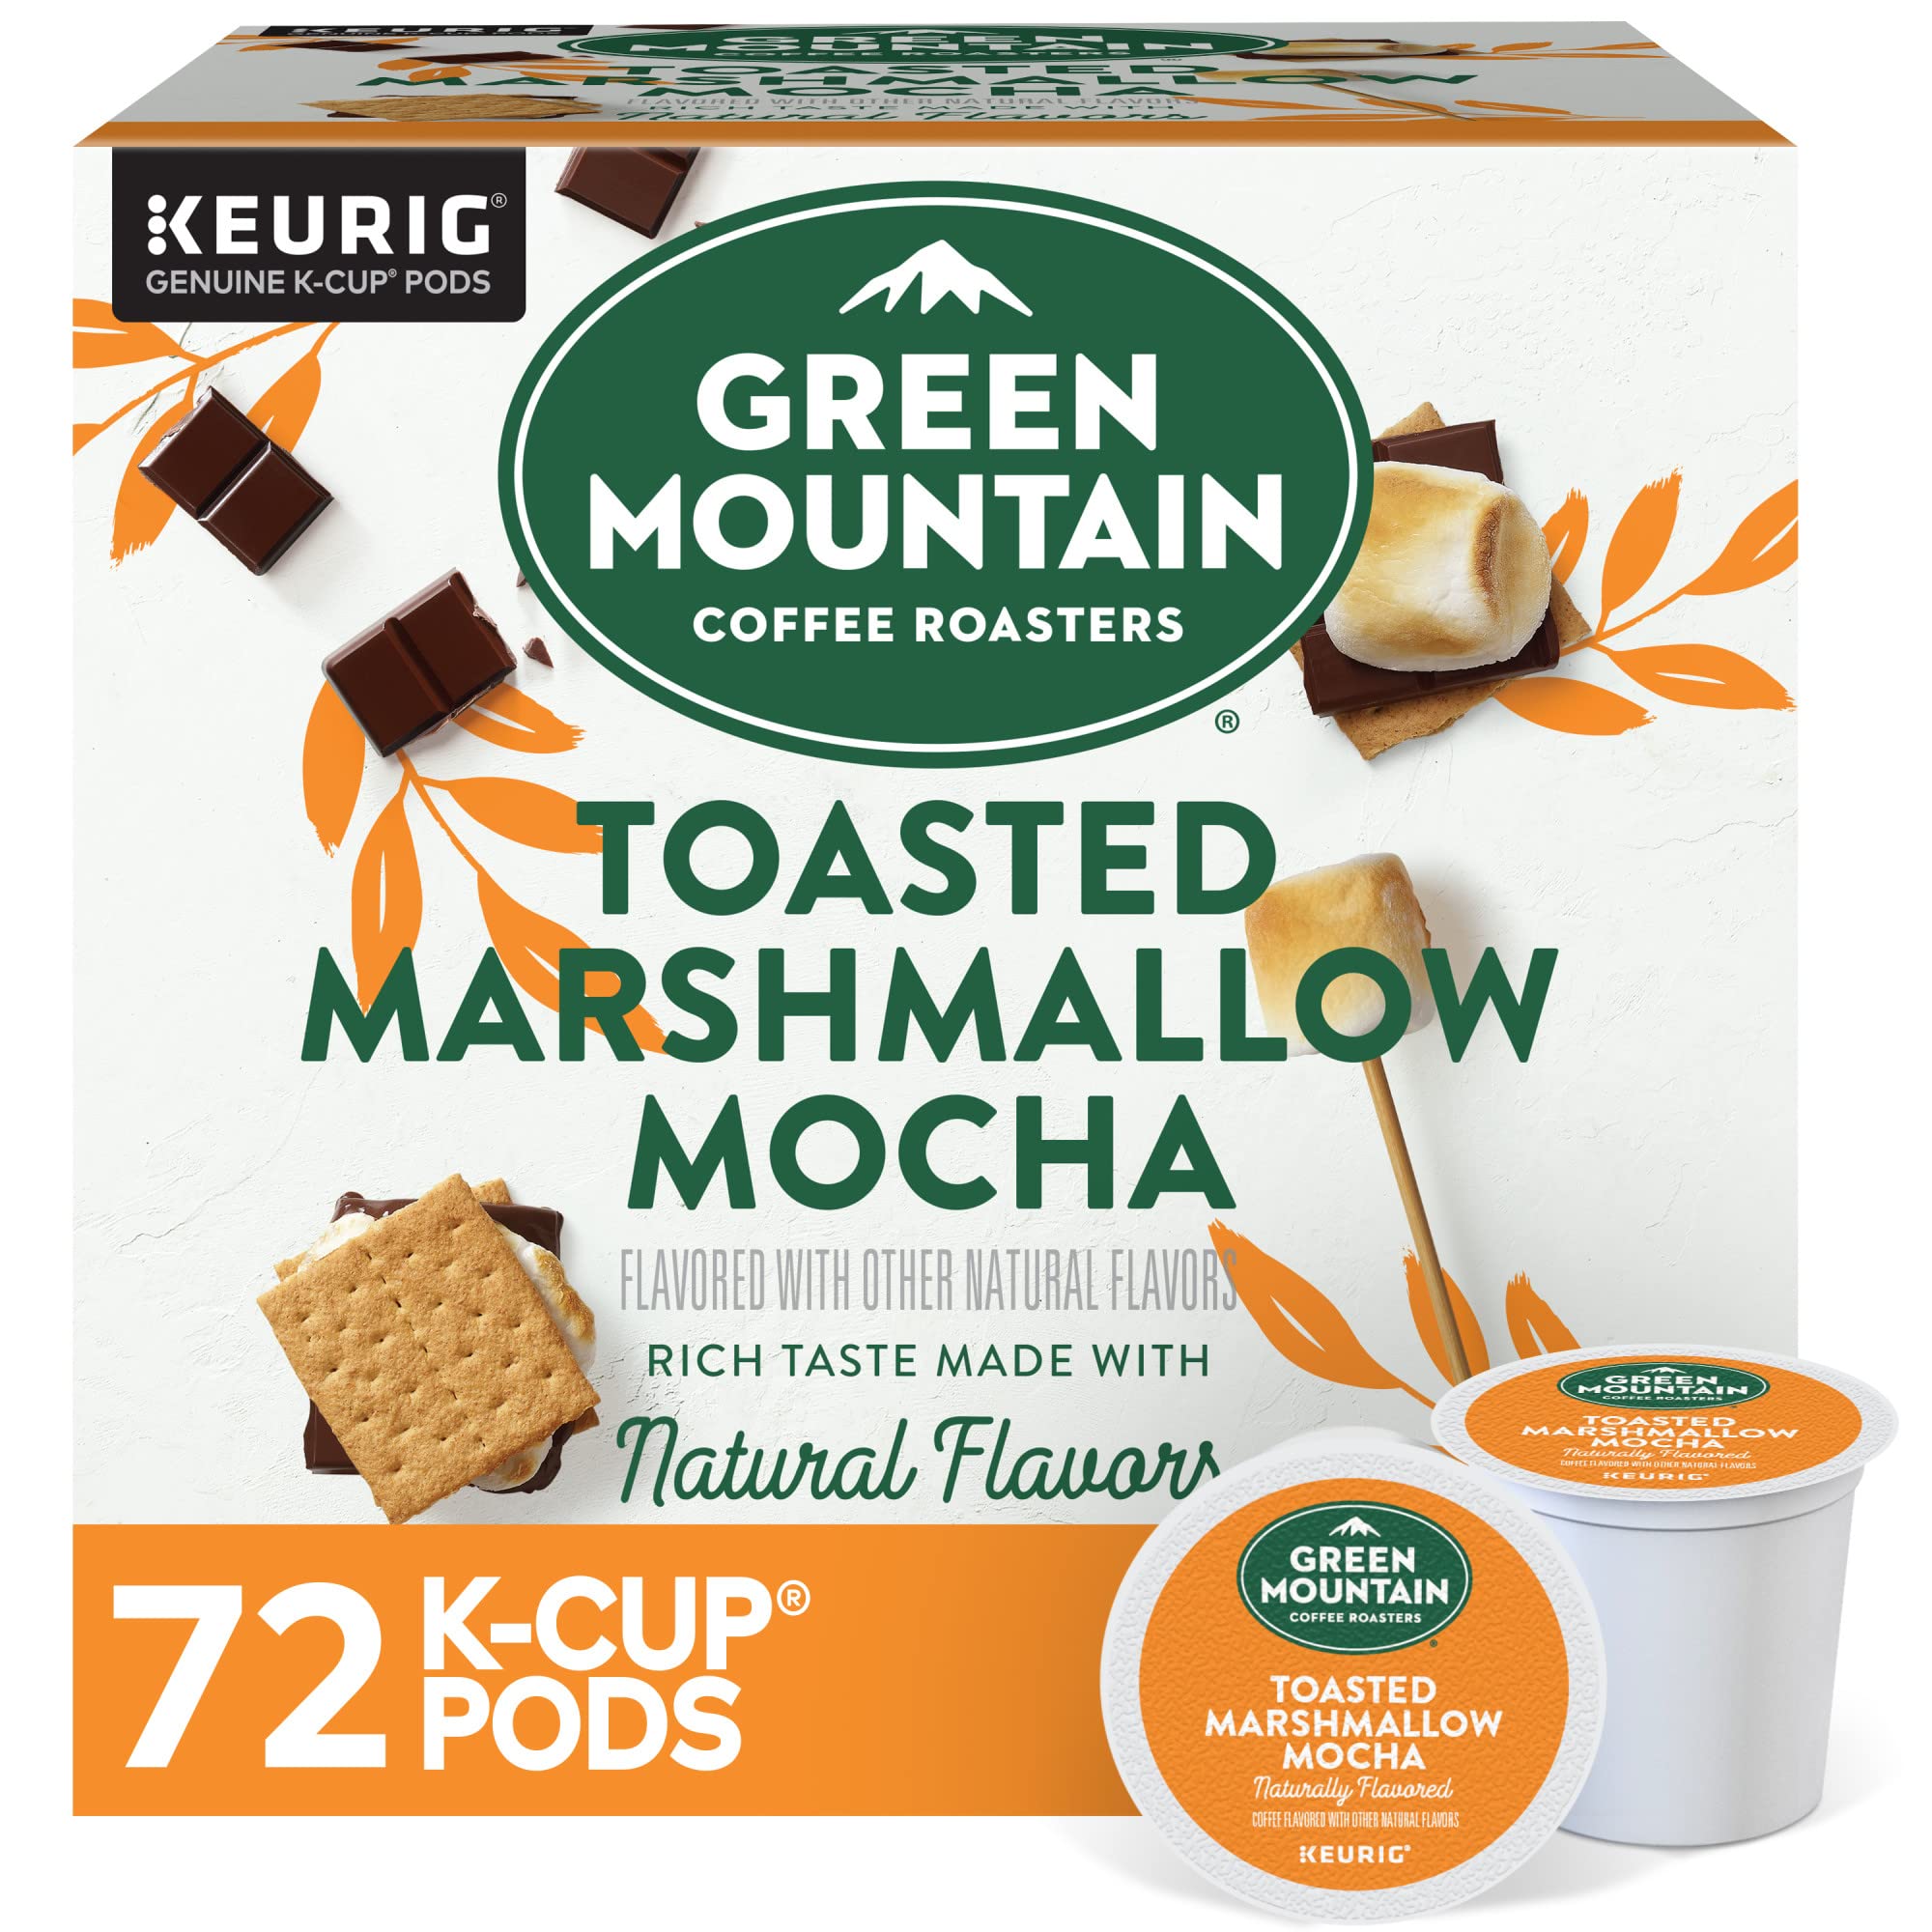 Green Mountain Coffee Roasters Toasted Marshmallow Mocha, Single-Serve Keurig K-Cup Pods, Flavored Light Roast Coffee, 72 Count